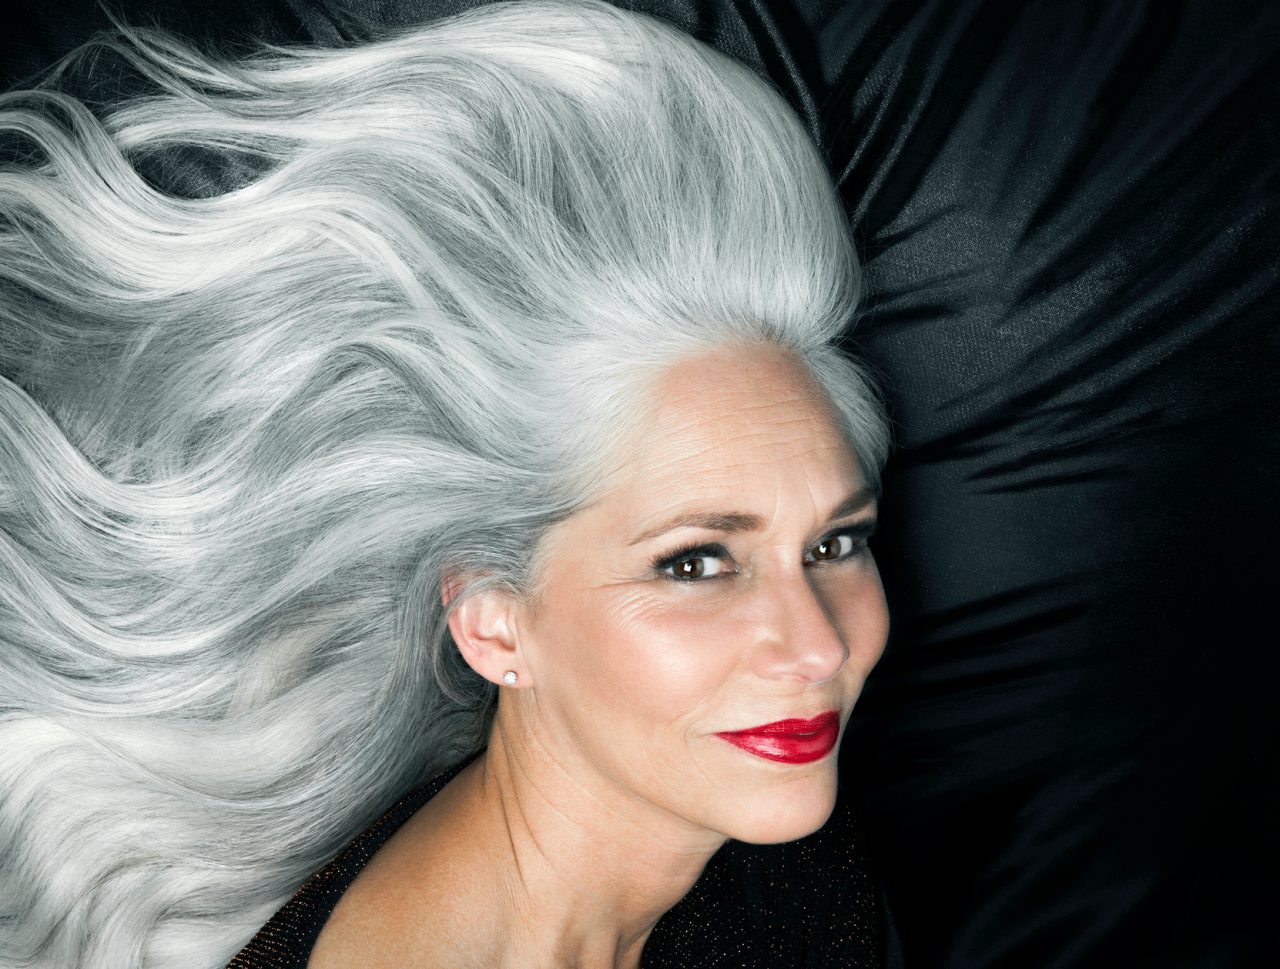 Can You Get Rid of Your Gray Hair?